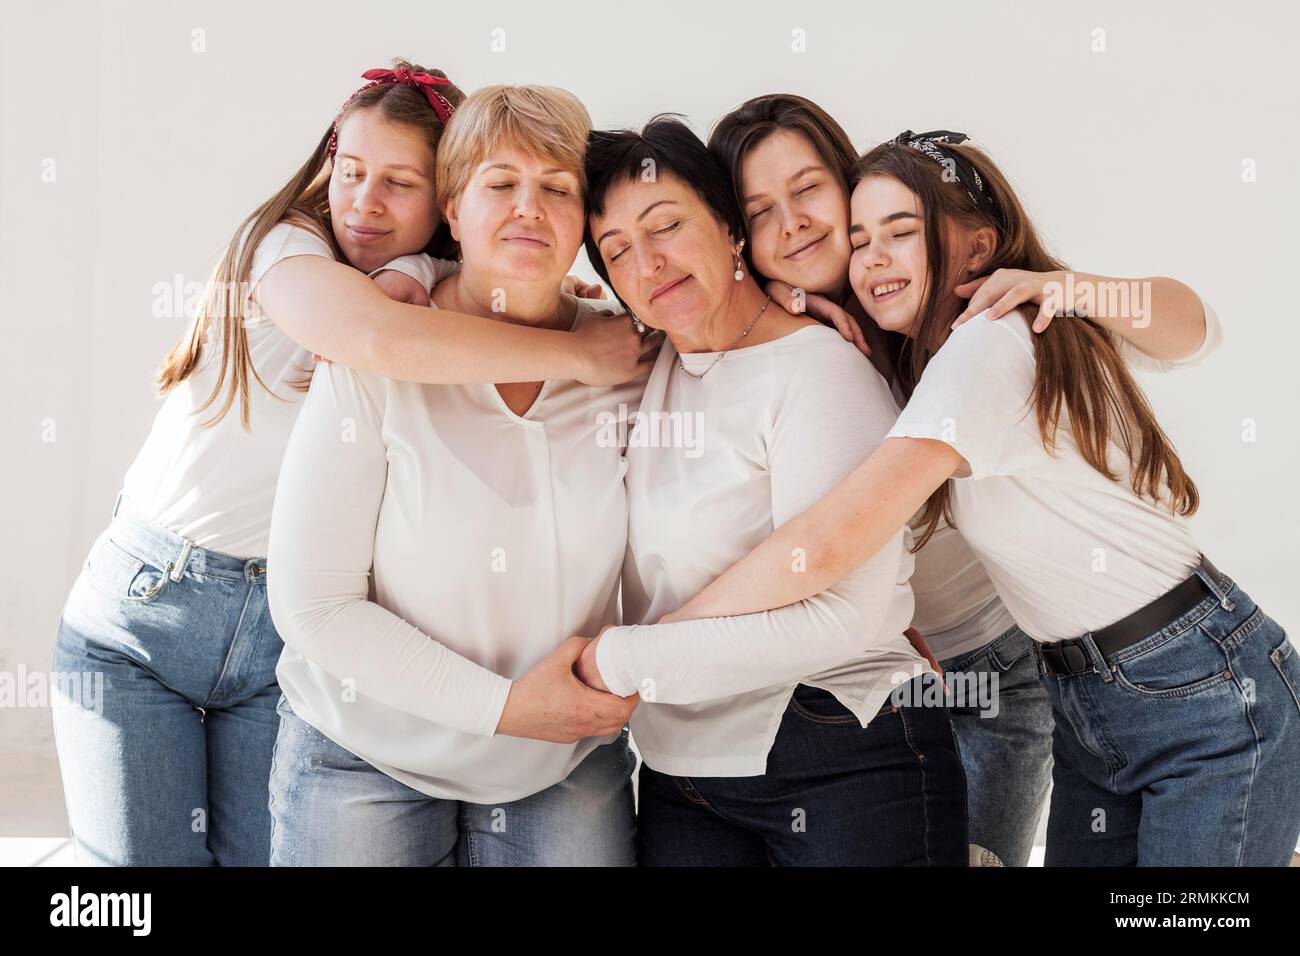 Togetherness group women hugging Stock Photo